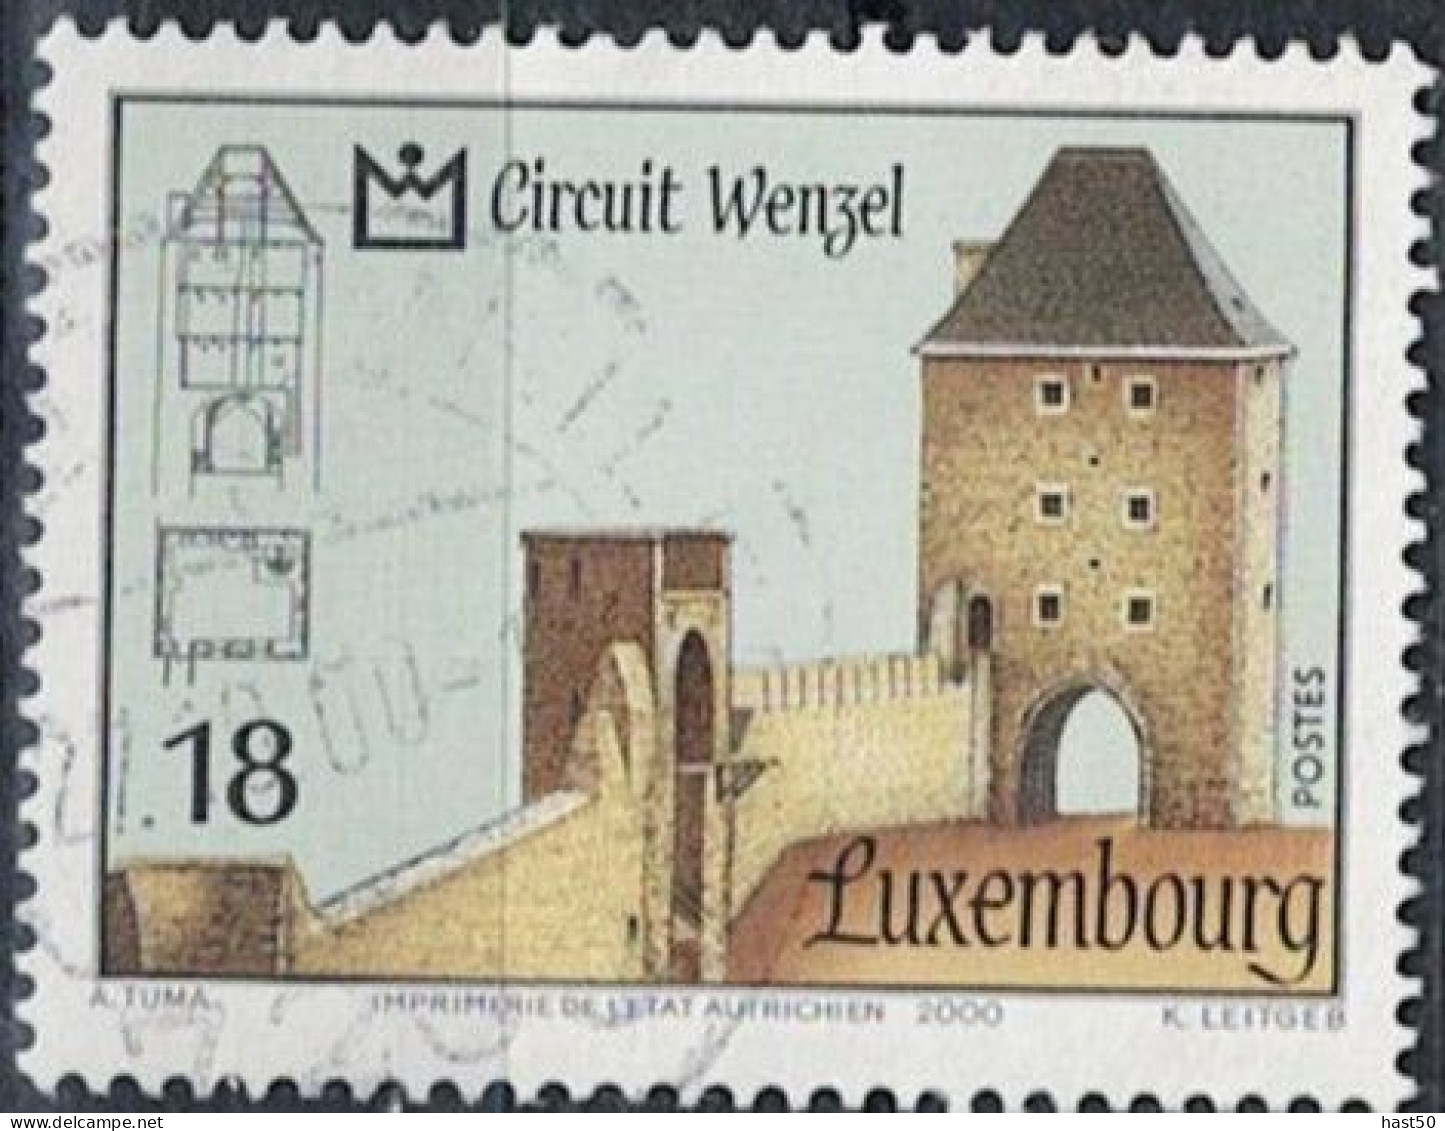 Luxemburg - Wenzel-Rundweg (MiNr: 1512) 2000 - Gest Used Obl - Used Stamps